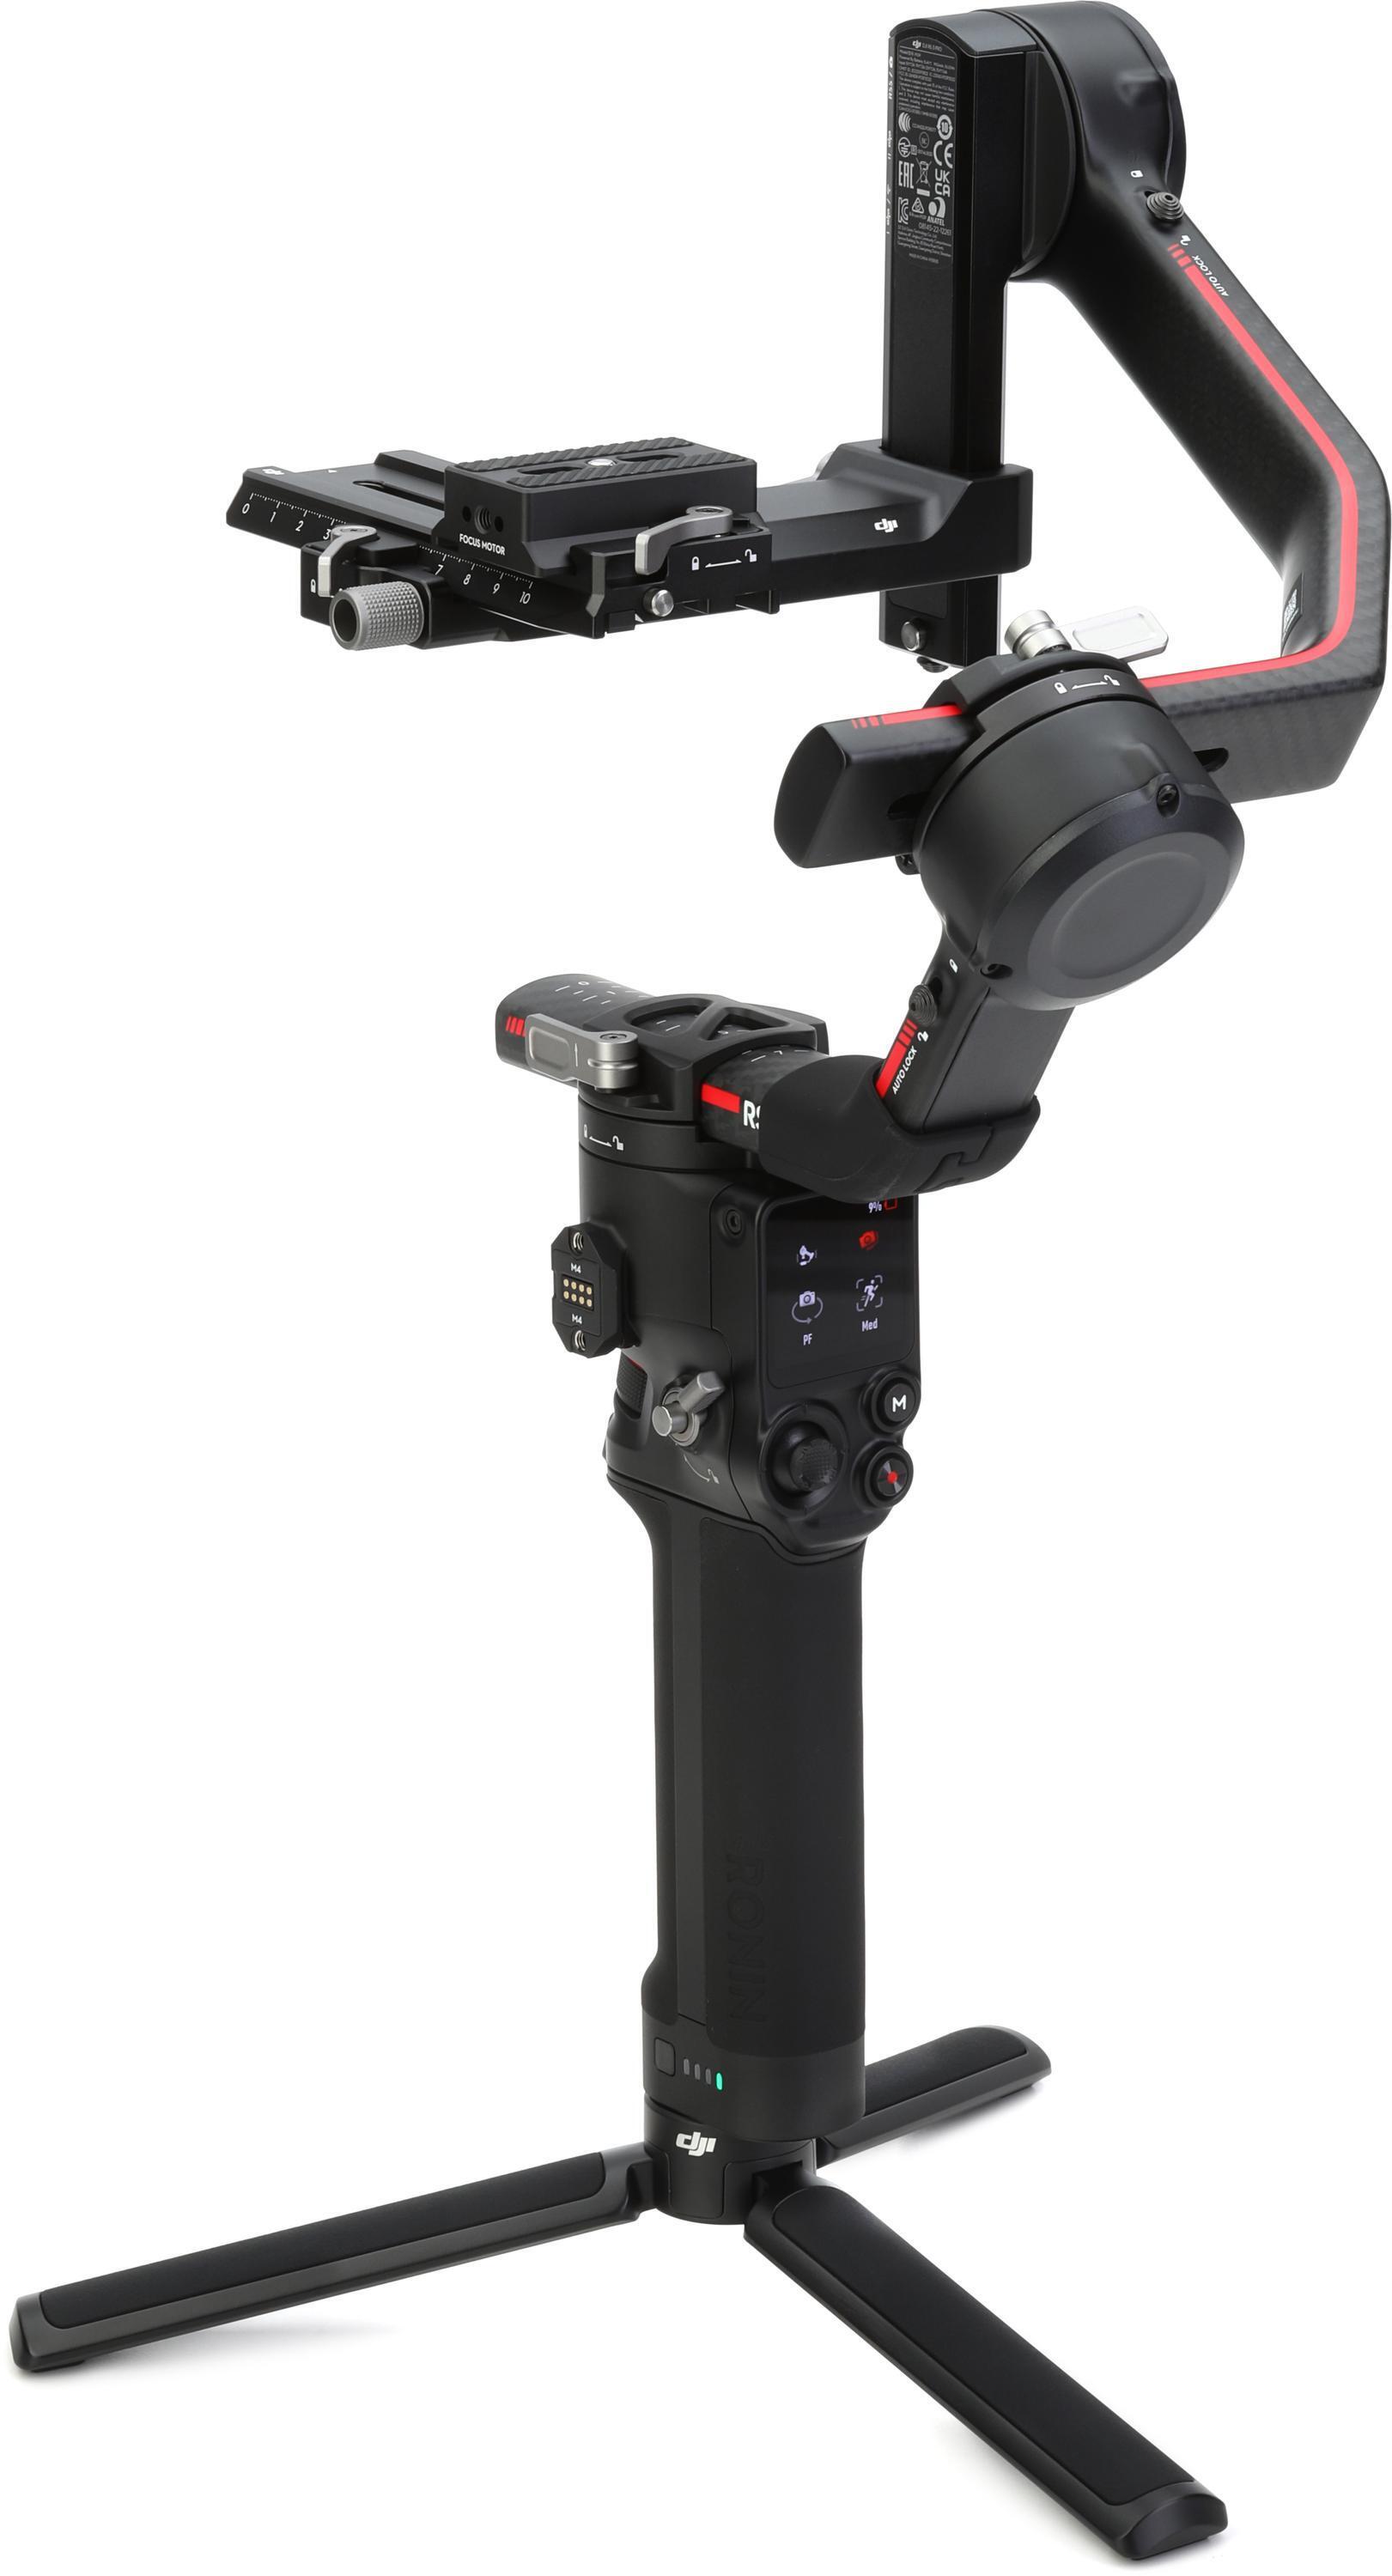 Buy DJI RS 3 Pro Gimbal Stabilizer Combo from Sharp Imaging